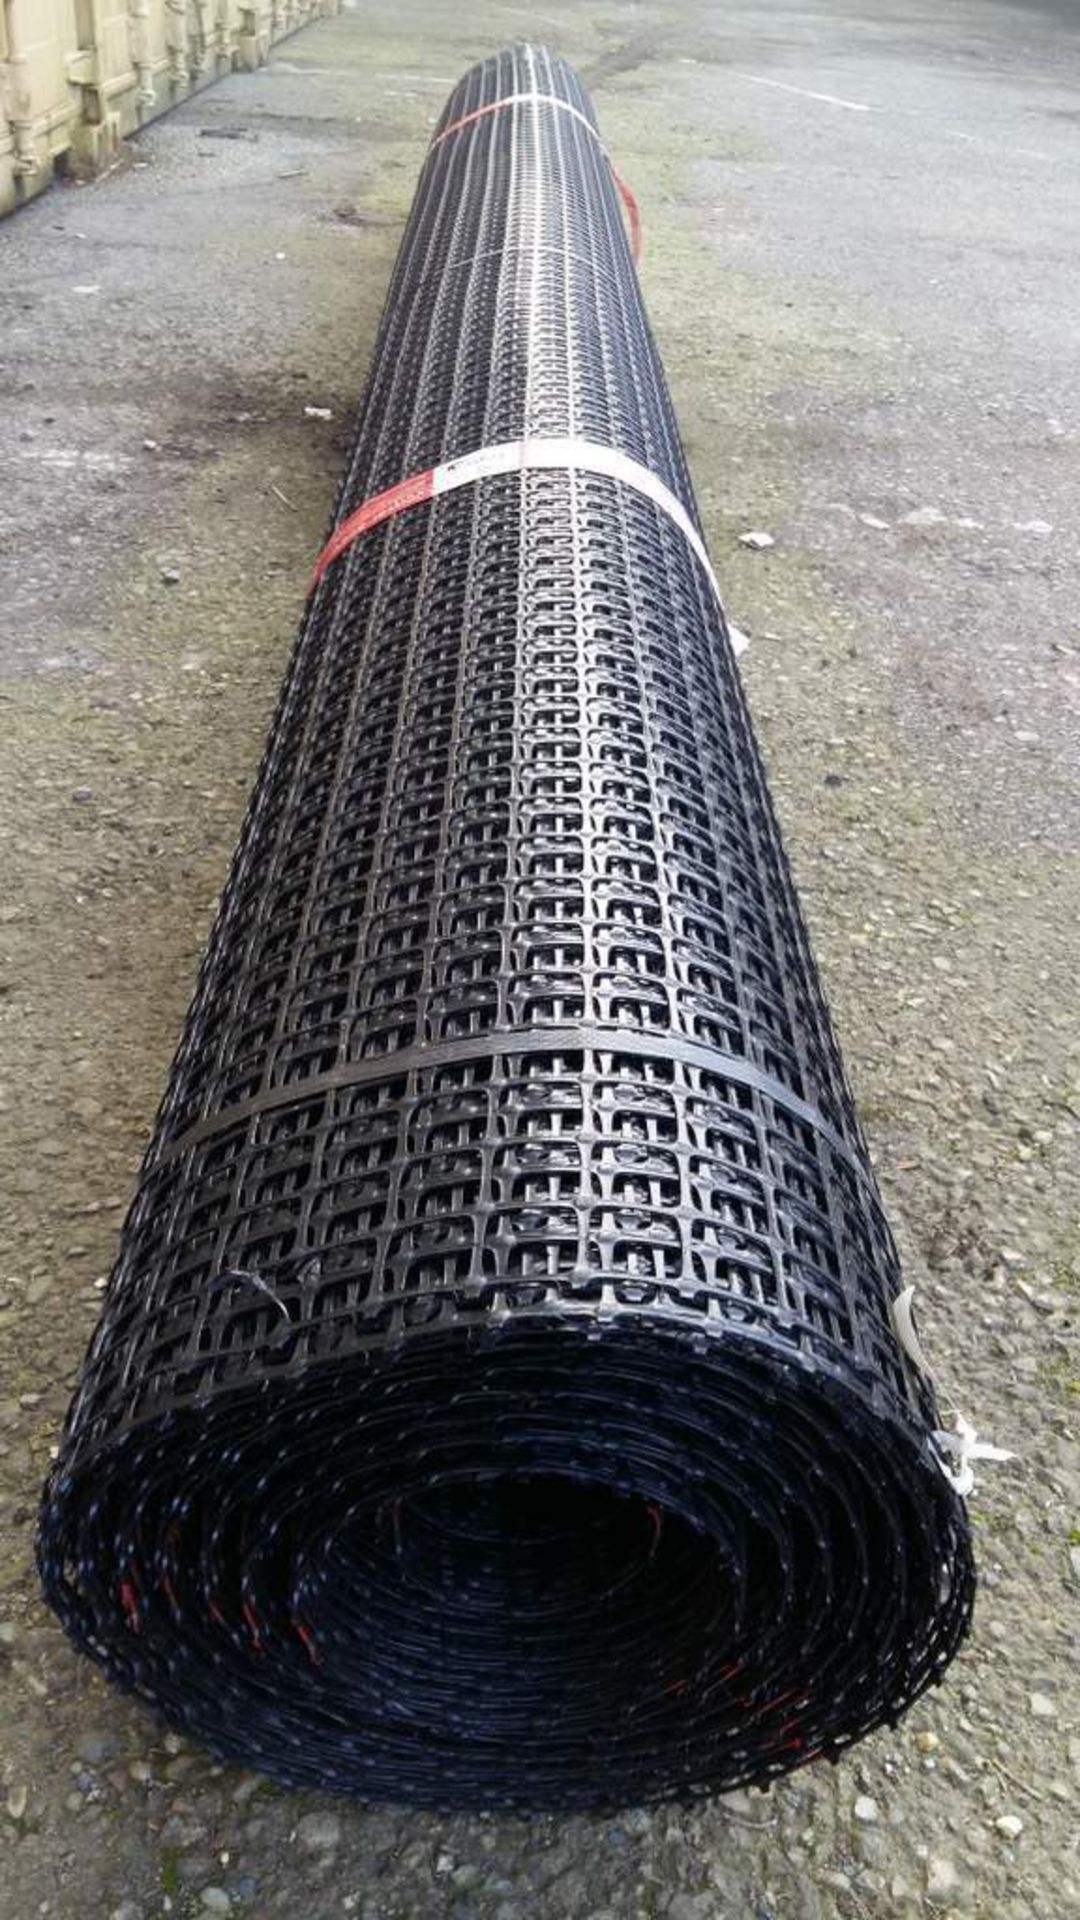 Qty 5 x UNISSUED Tensar SS20 Geogrid Ground Foundation Reinforcement Roll 4m x 75m - Image 2 of 6